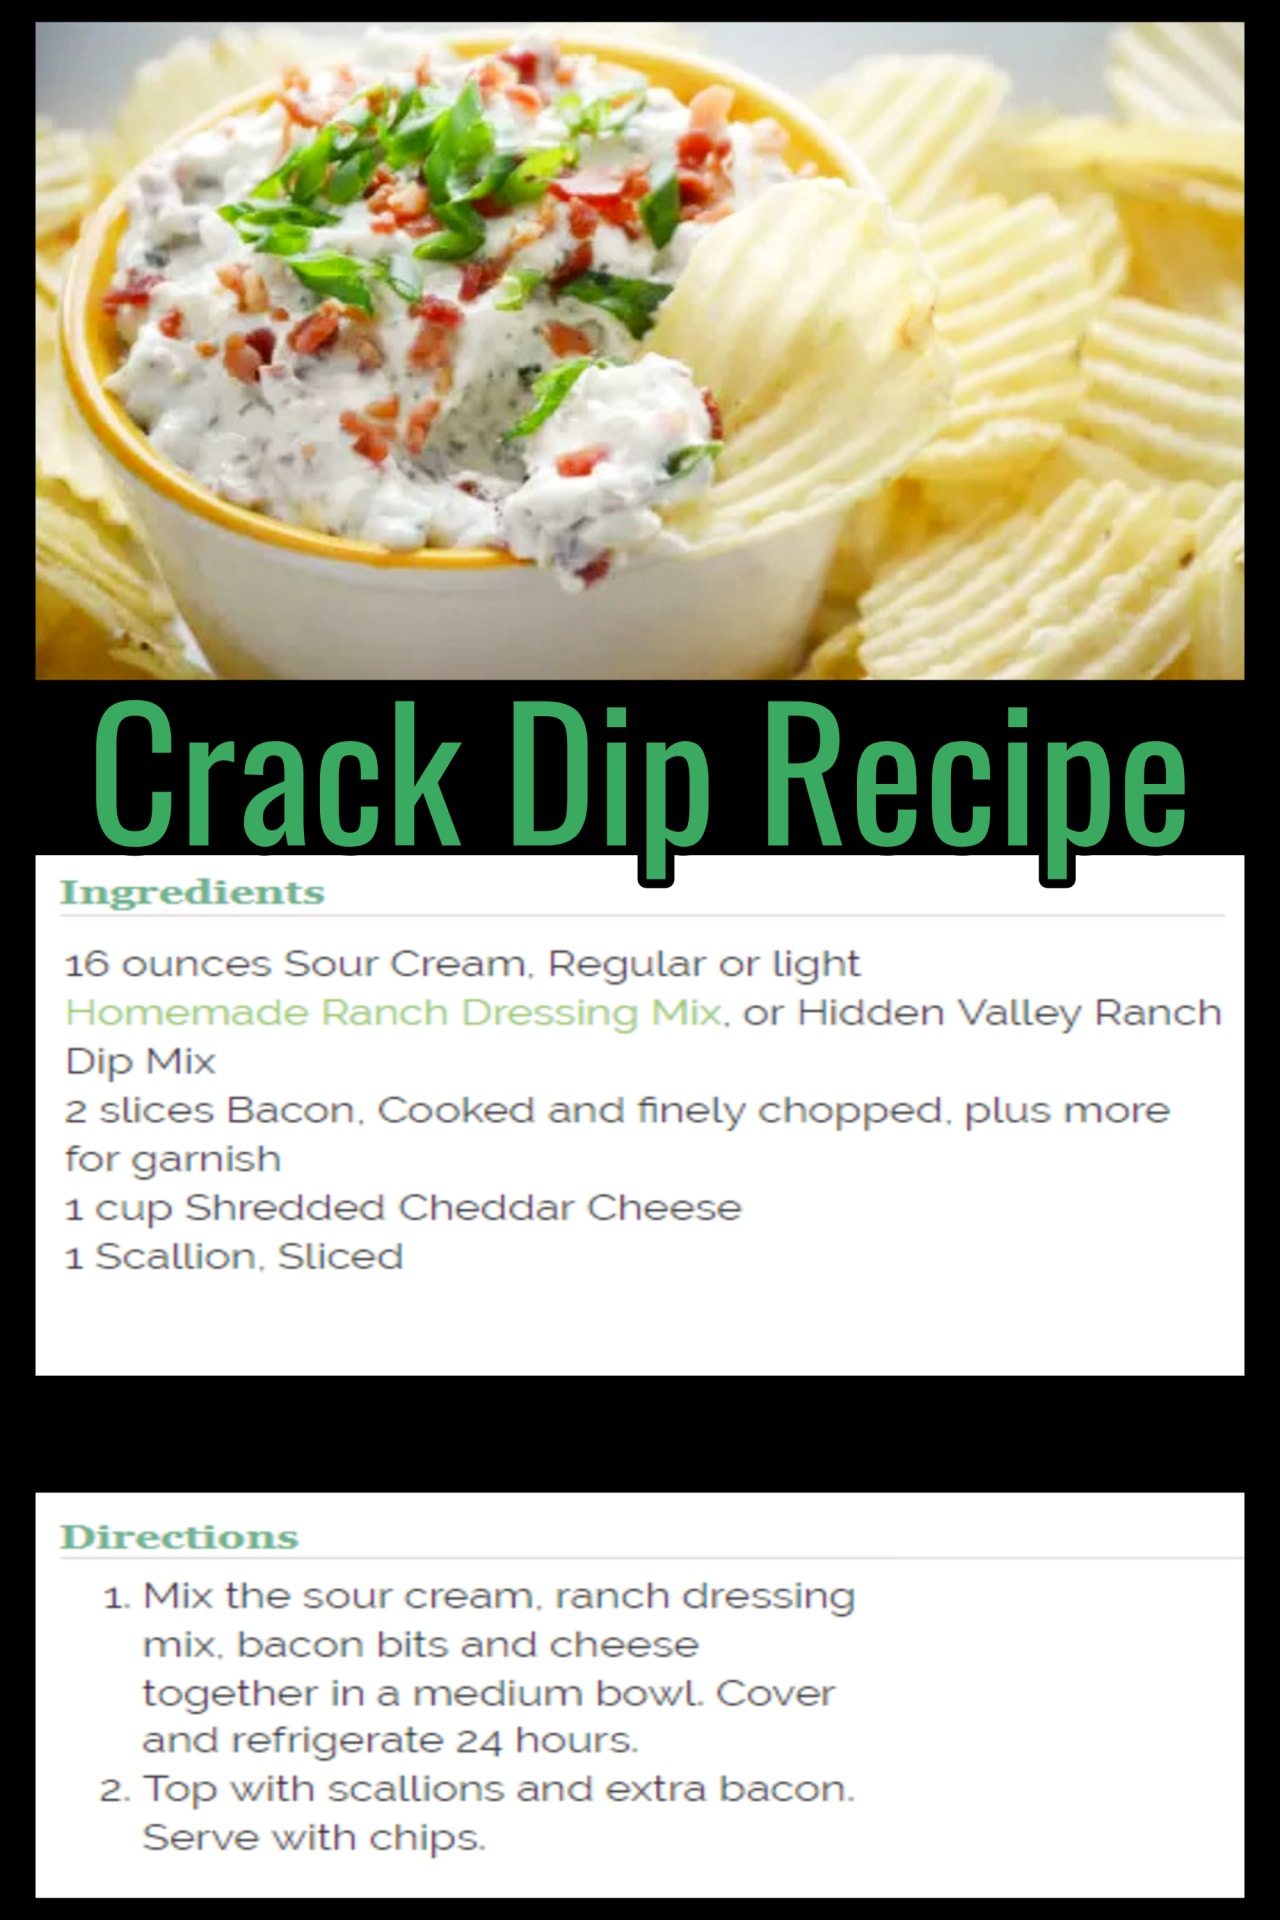 Easy party dips appetizer ideas - cold party dips that are crowd pleasers - this crack dip recipe is so cheap and easy to make and a crowd pleasing dip appetizer idea for entertaining, family gatherings or for any large group or crowd